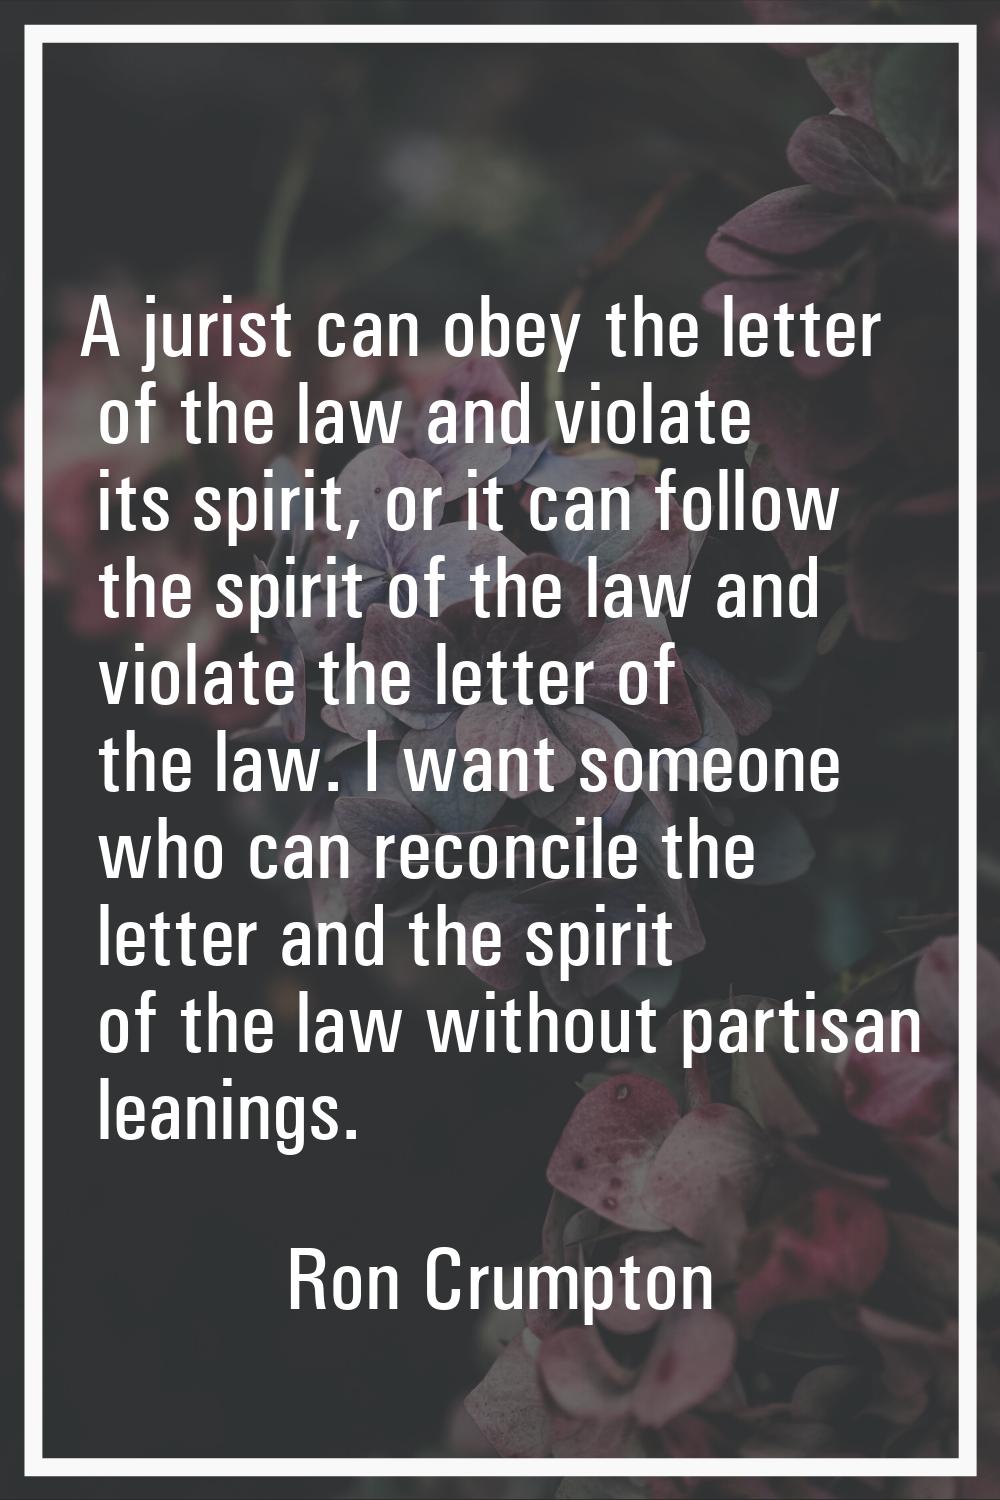 A jurist can obey the letter of the law and violate its spirit, or it can follow the spirit of the 